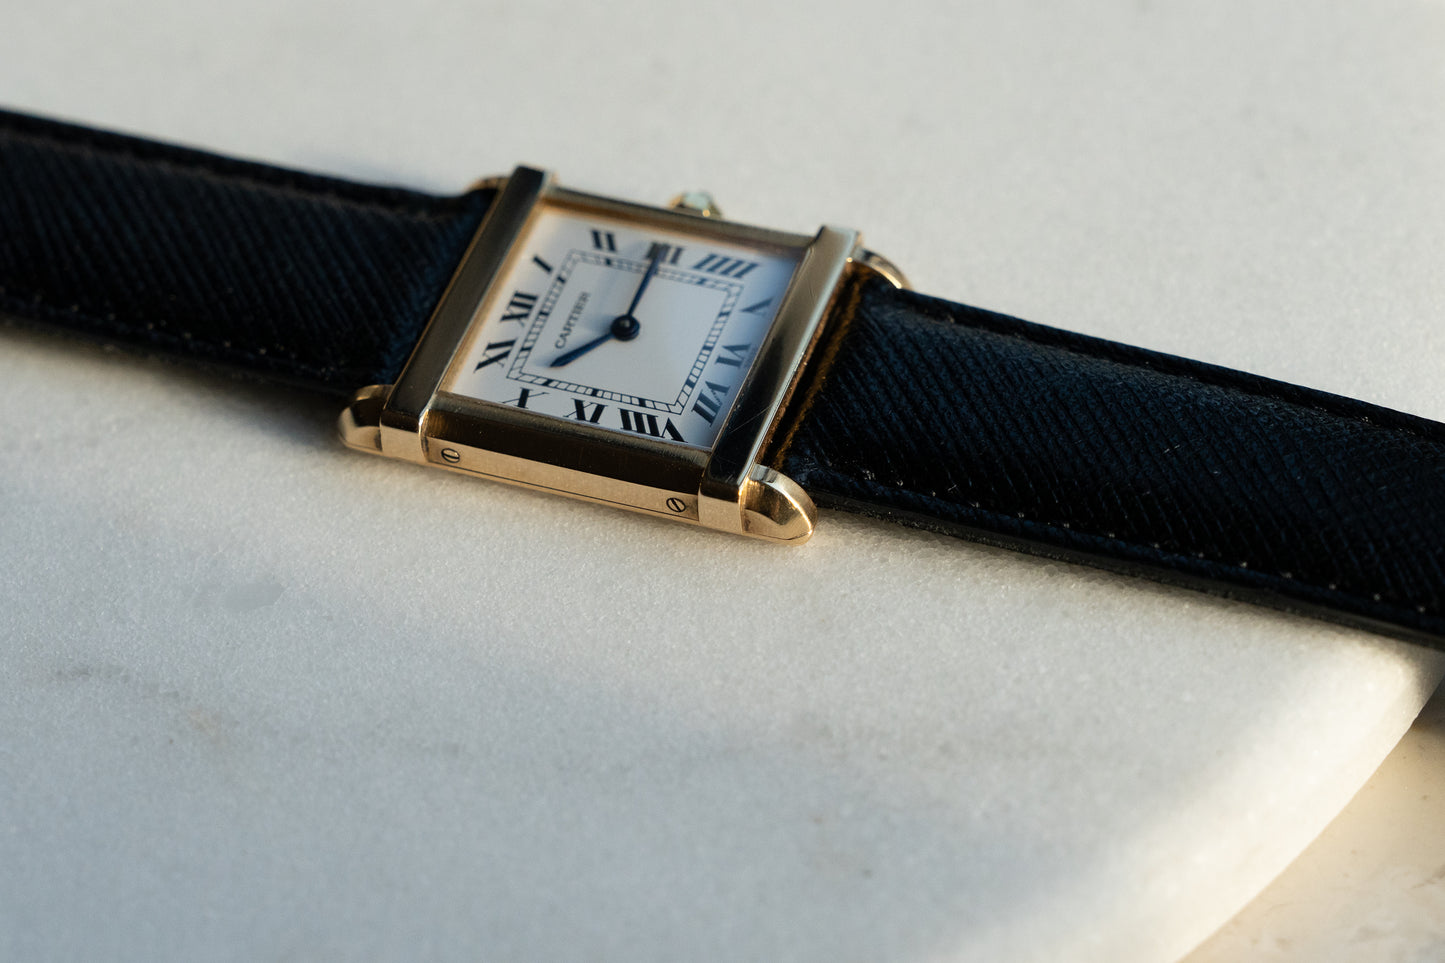 Cartier Tank Chinoise ref 8105 in 18k Yellow Gold